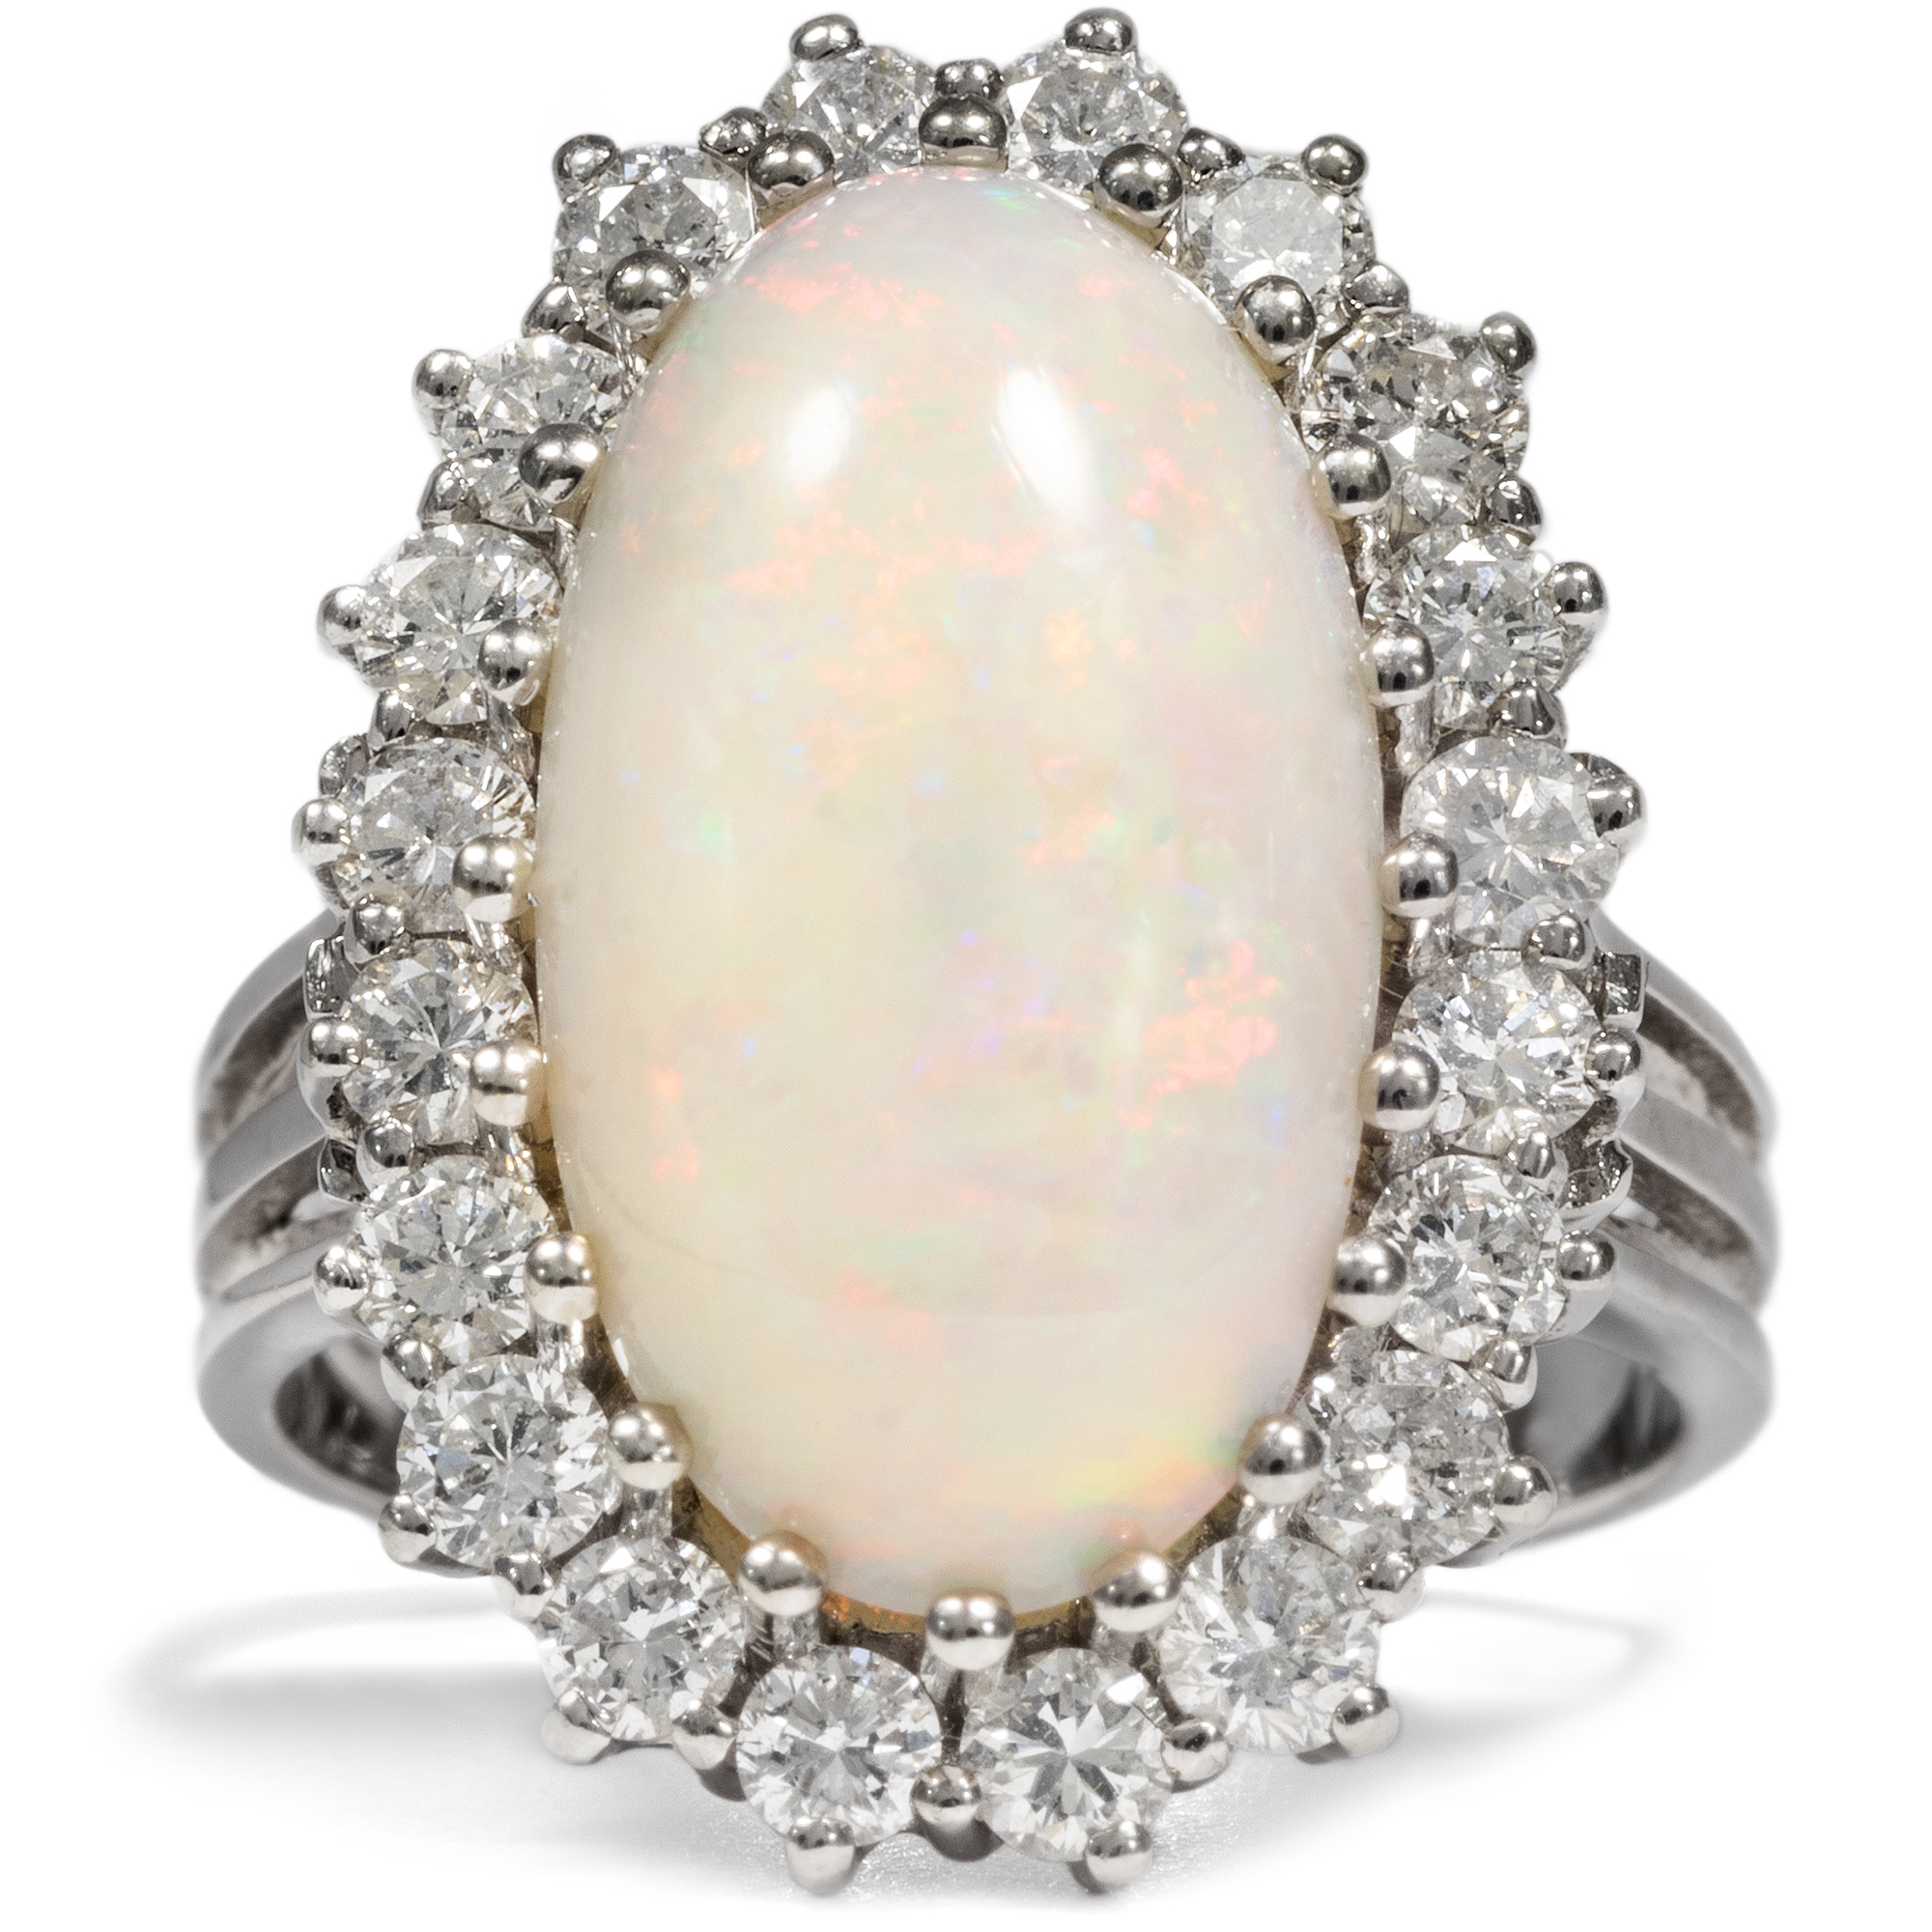 Precious Cocktail Ring With Large Opal & Diamonds in White Gold, ca. 1970